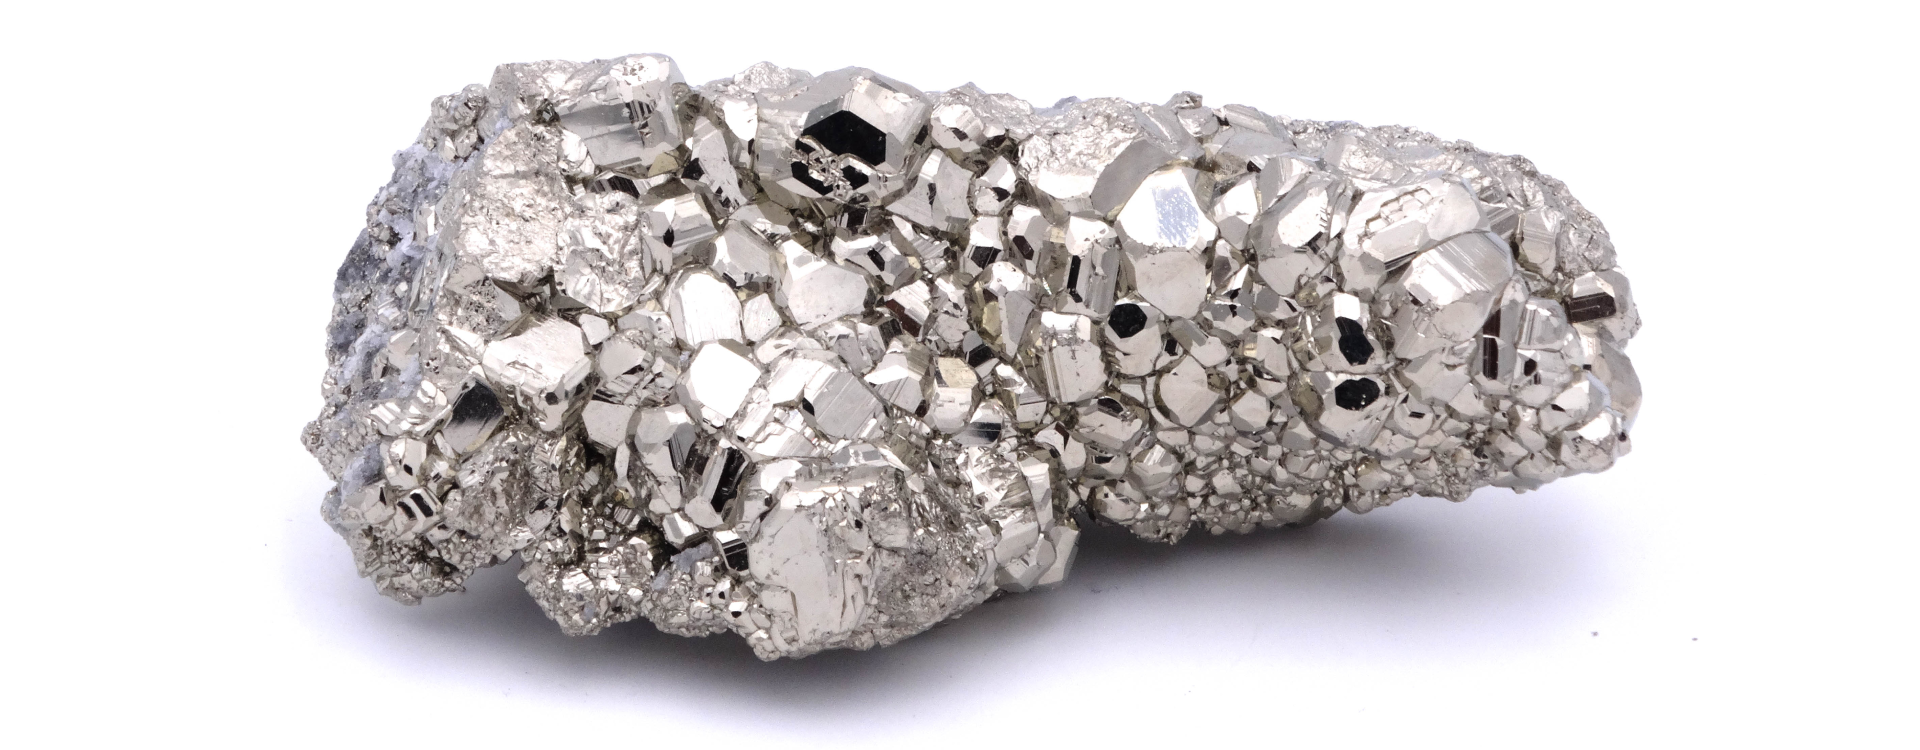 Pyrite in lithotherapy (description and properties)